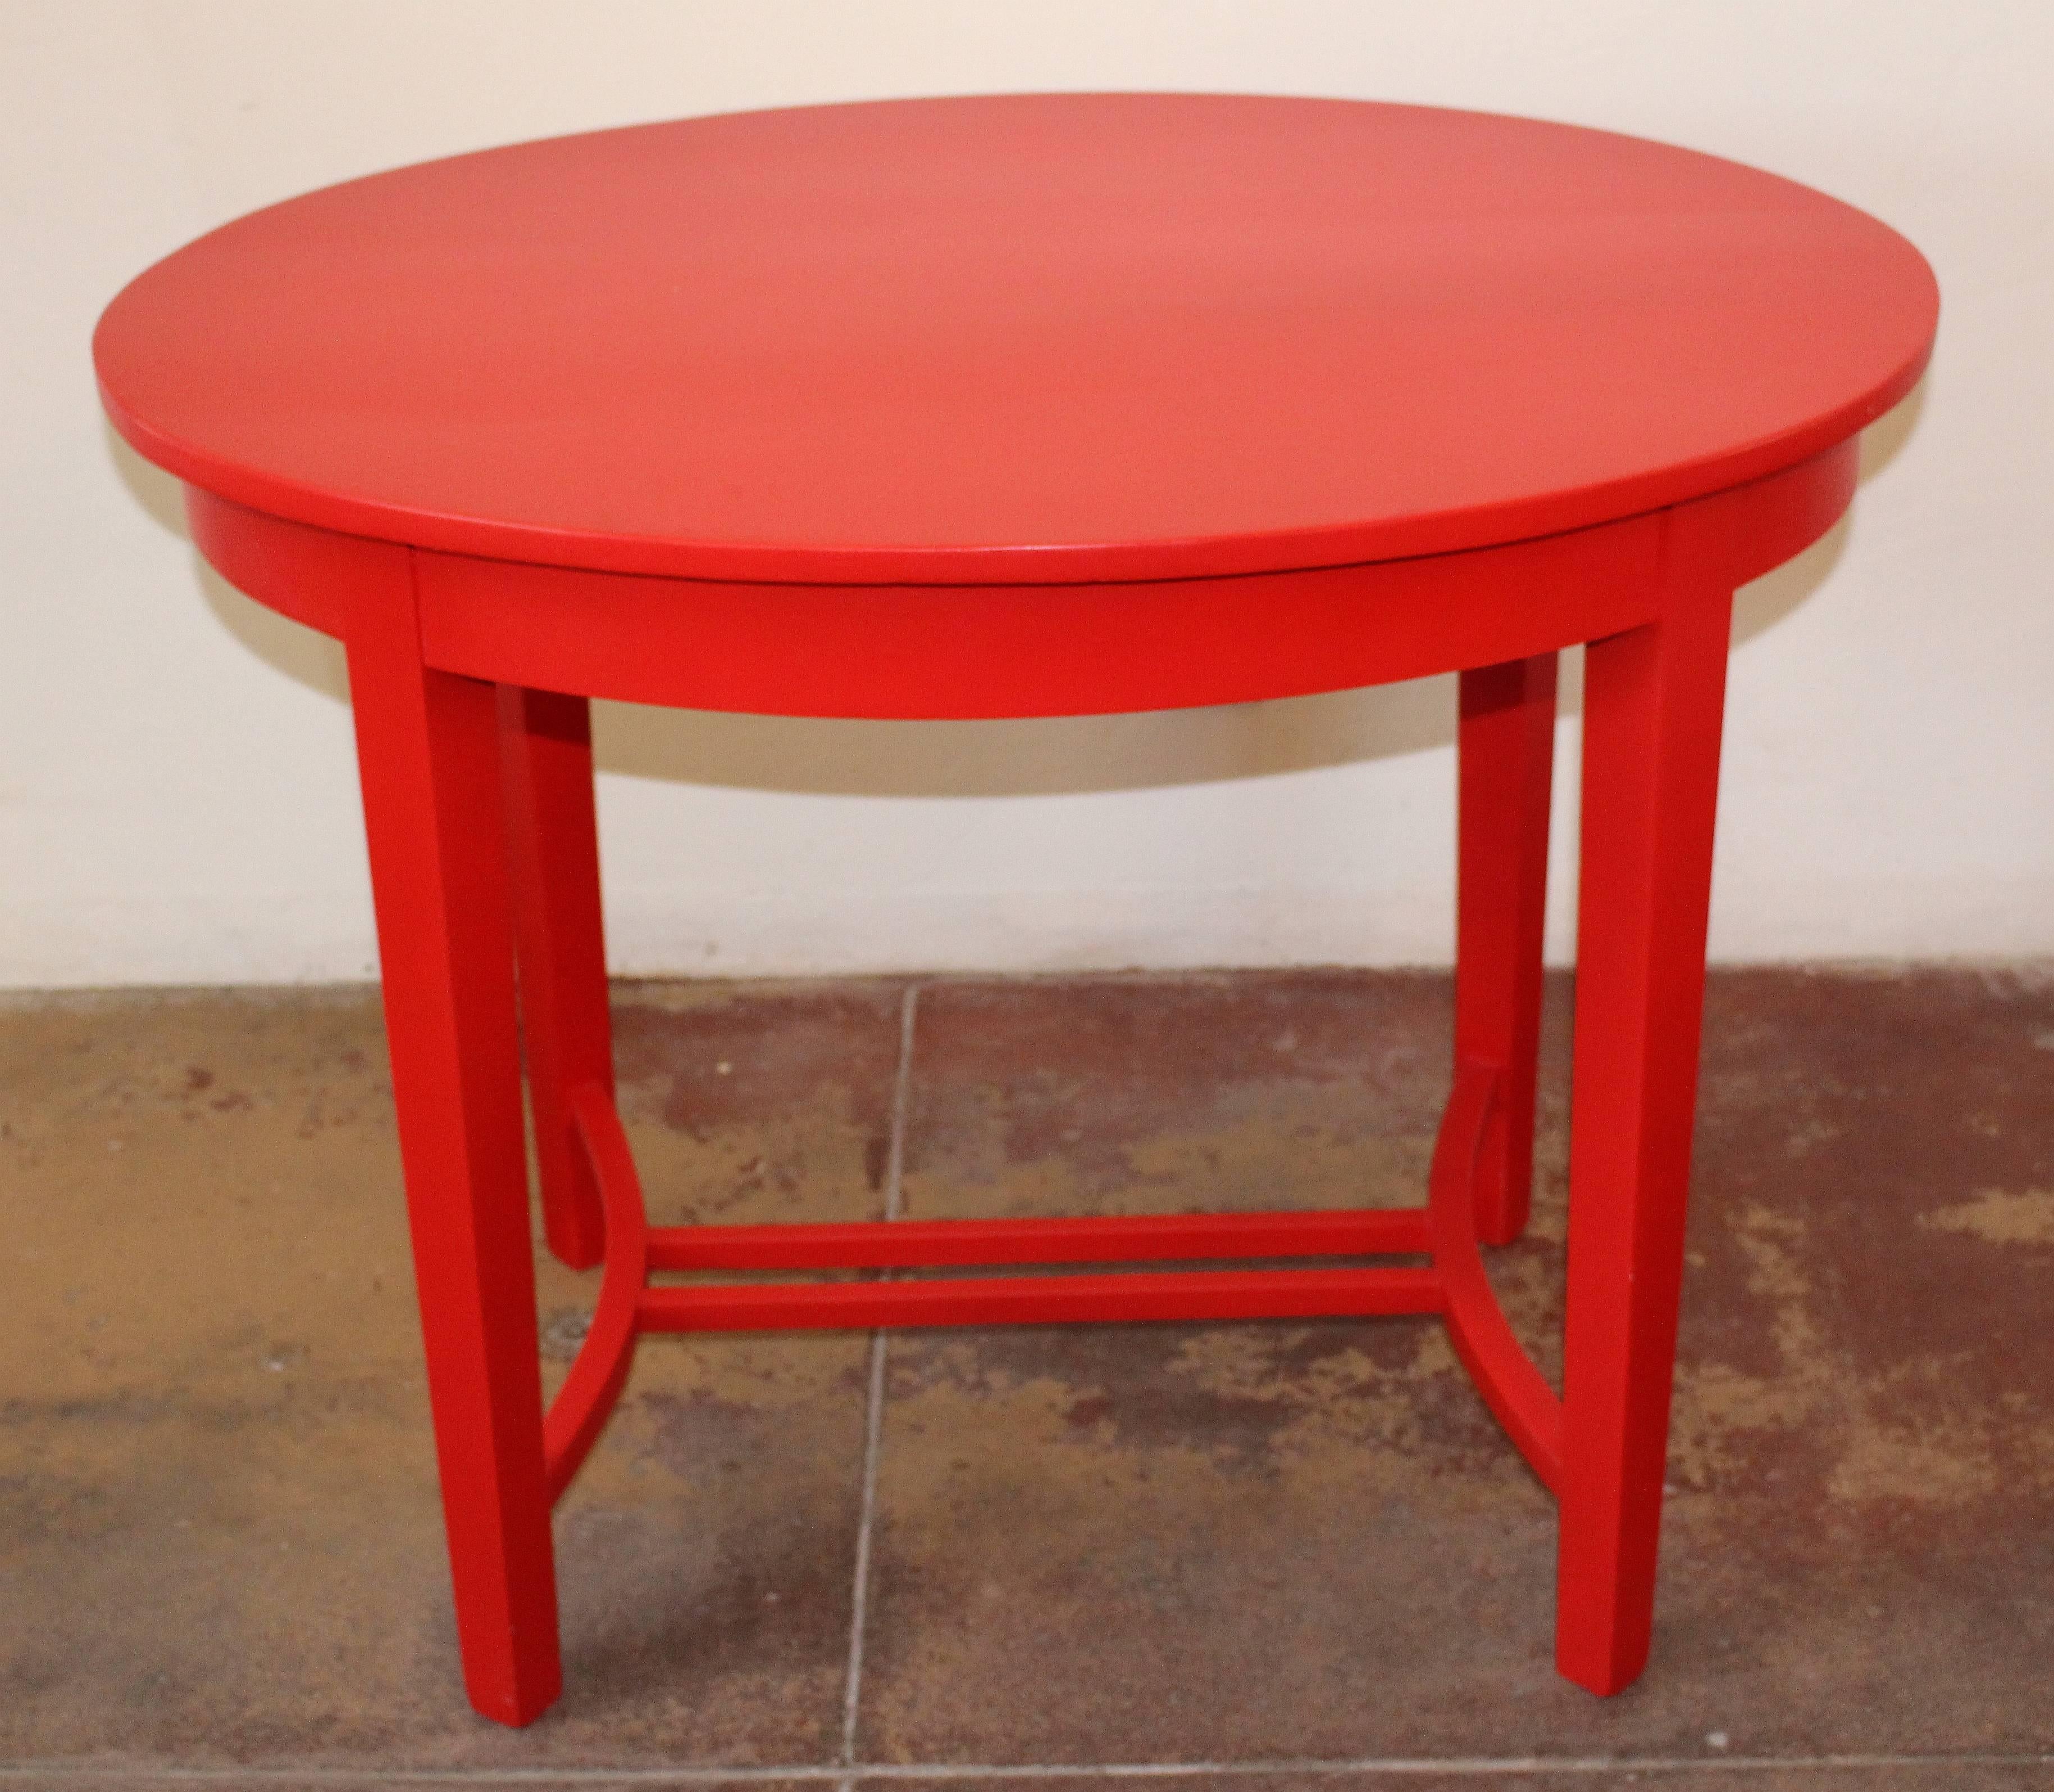 Mid-20th Century French Art Deco Side Table